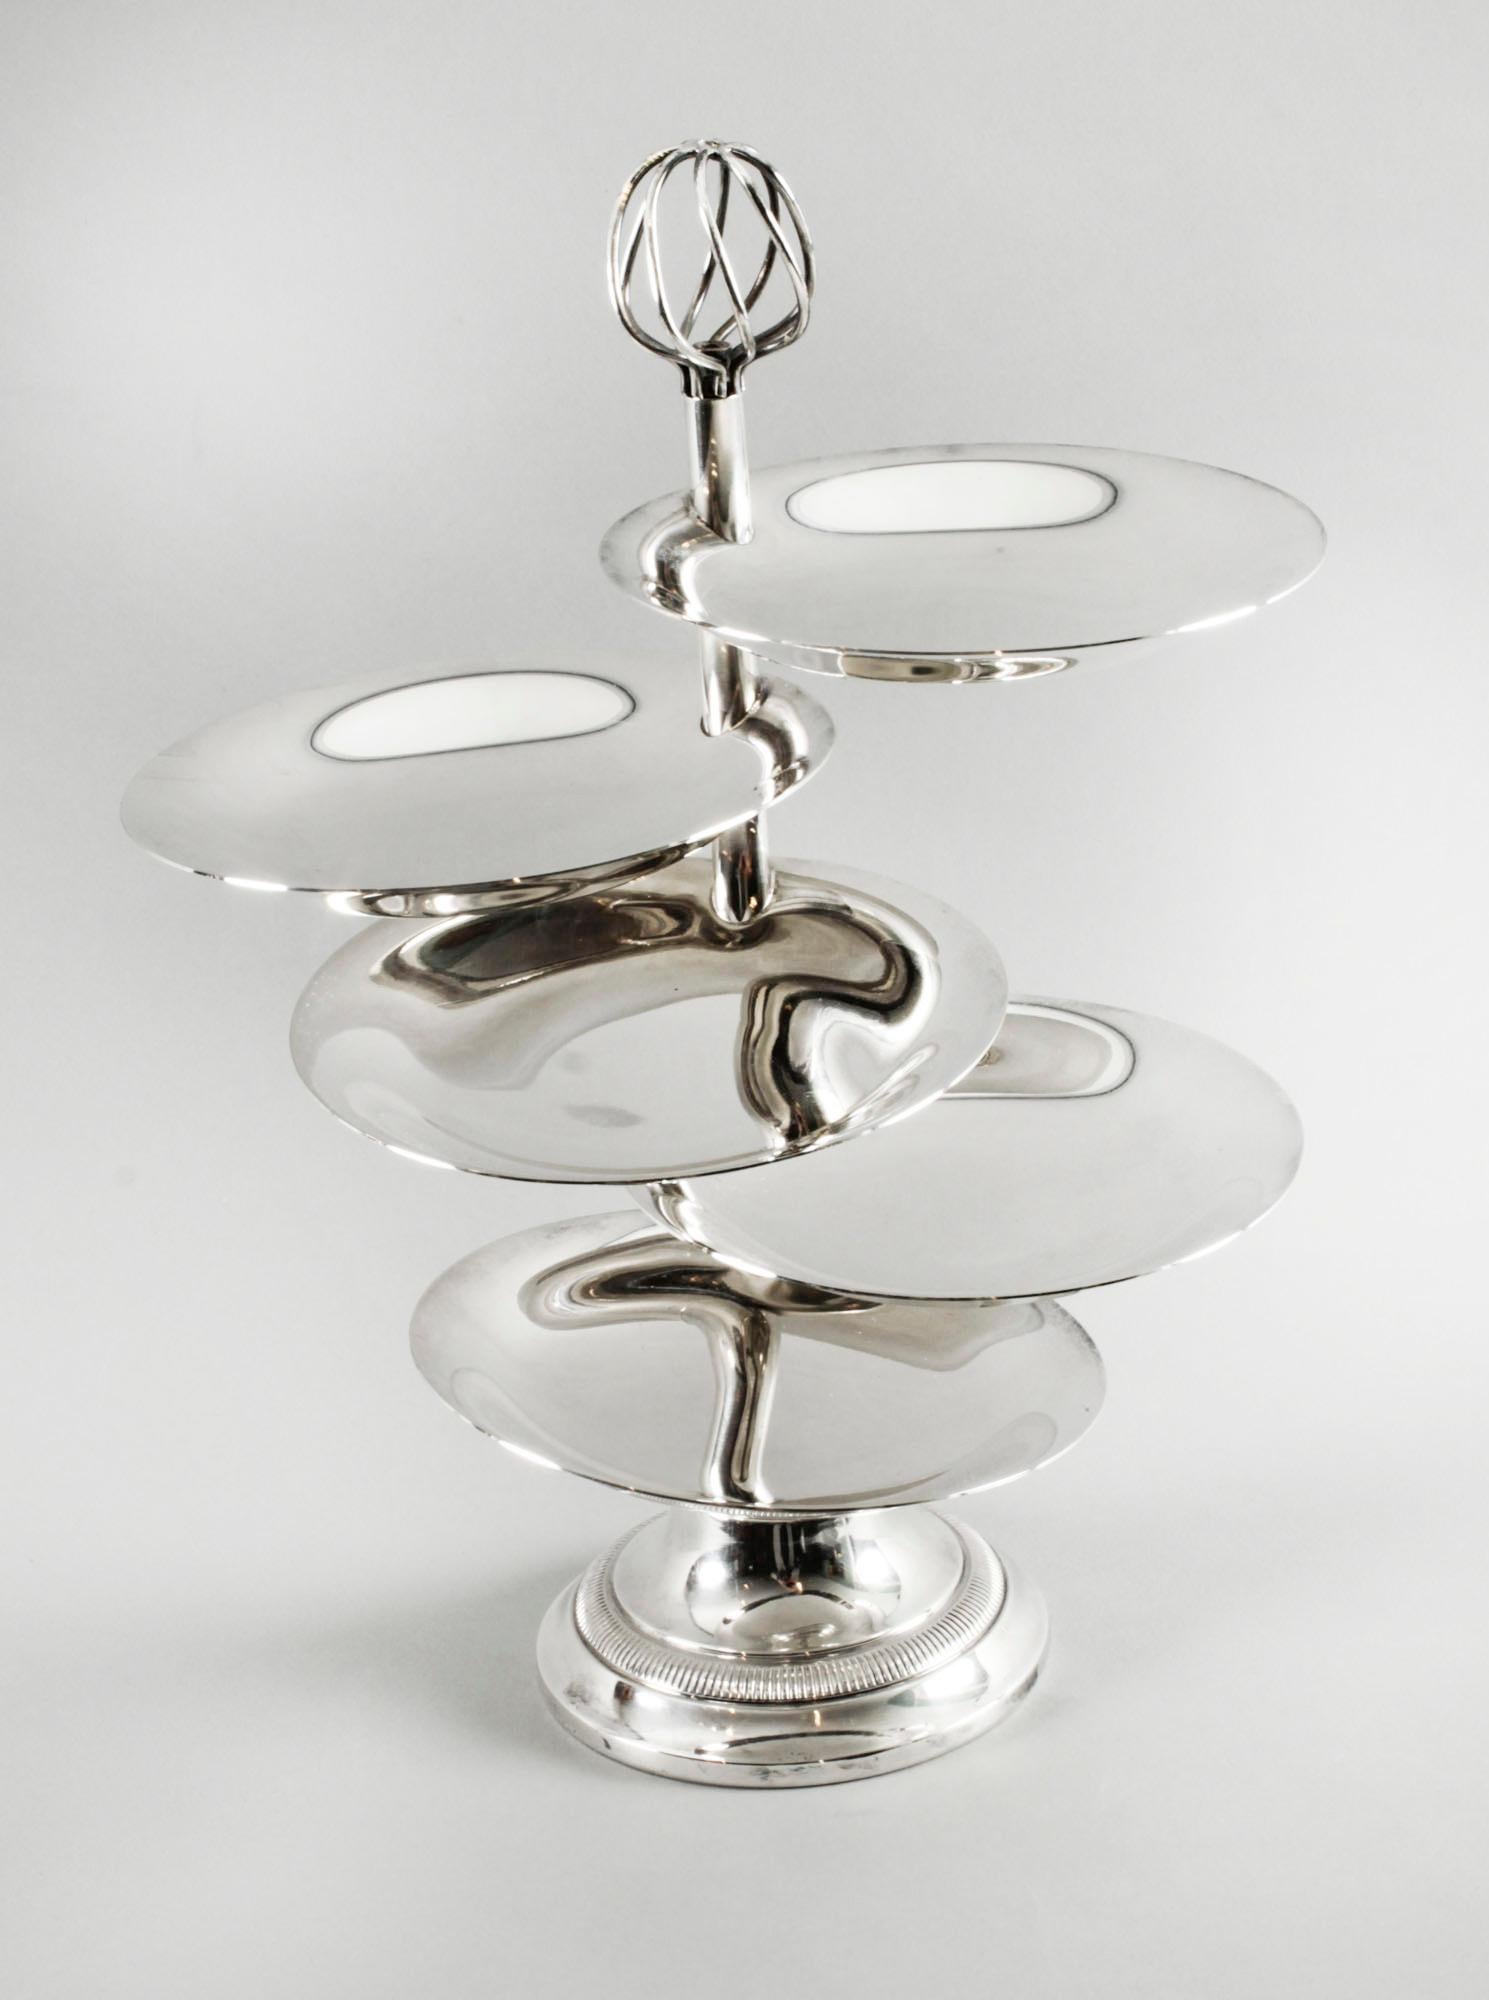 A top quality French Christofle silver plated layered hors d'oeuvres stand. The wrythen finial above five articulated plain polished bowls raised upon a spreading circular foot, bearing the makers mark for Christofle, the highly sought after French